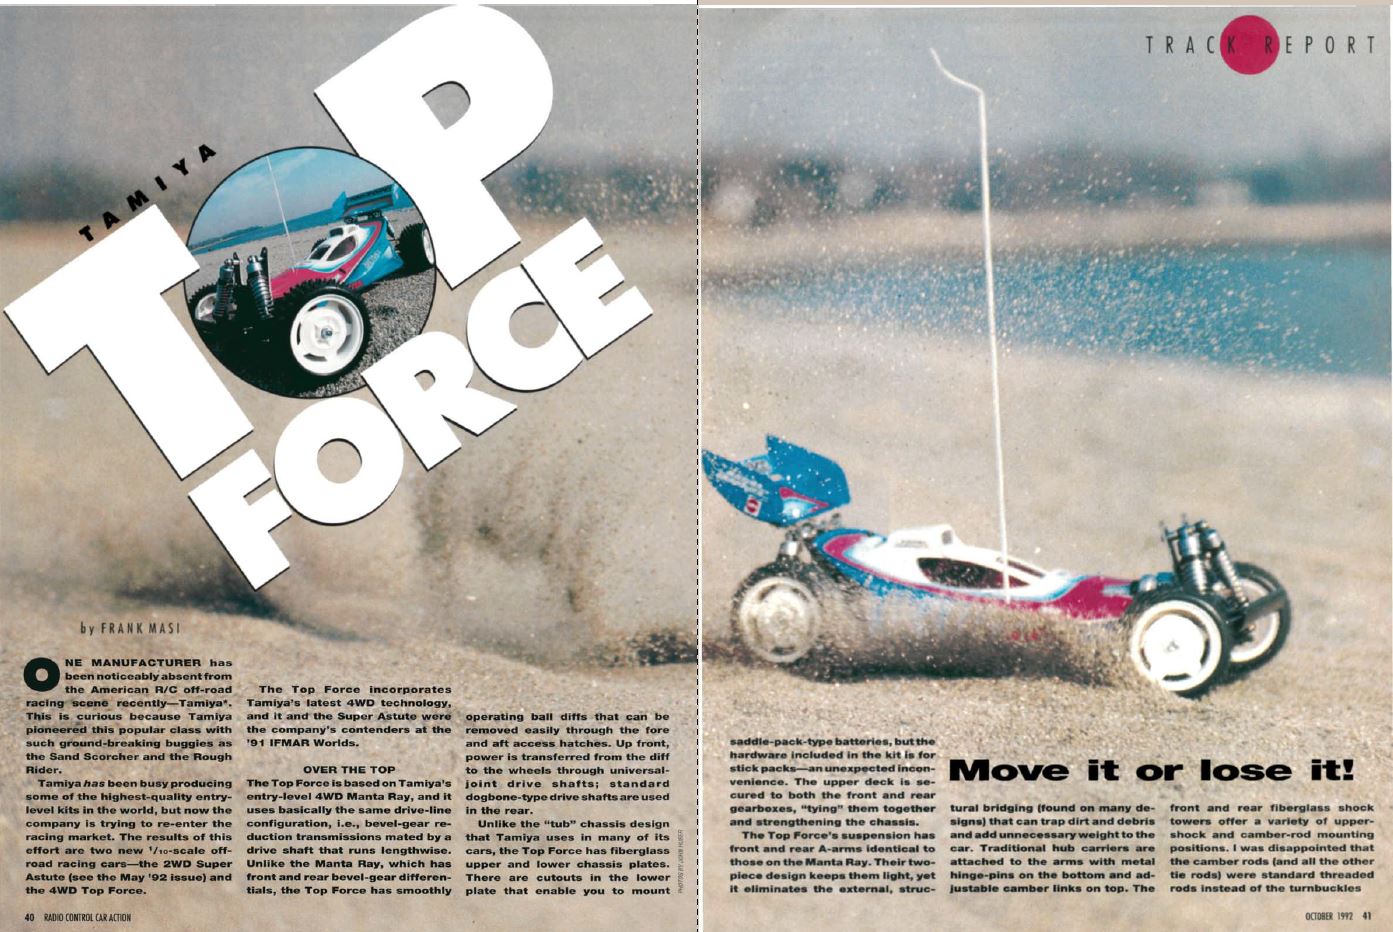 #TBT Tamiya Top Force 4WD Buggy Reviewed in The October 1992 Issue